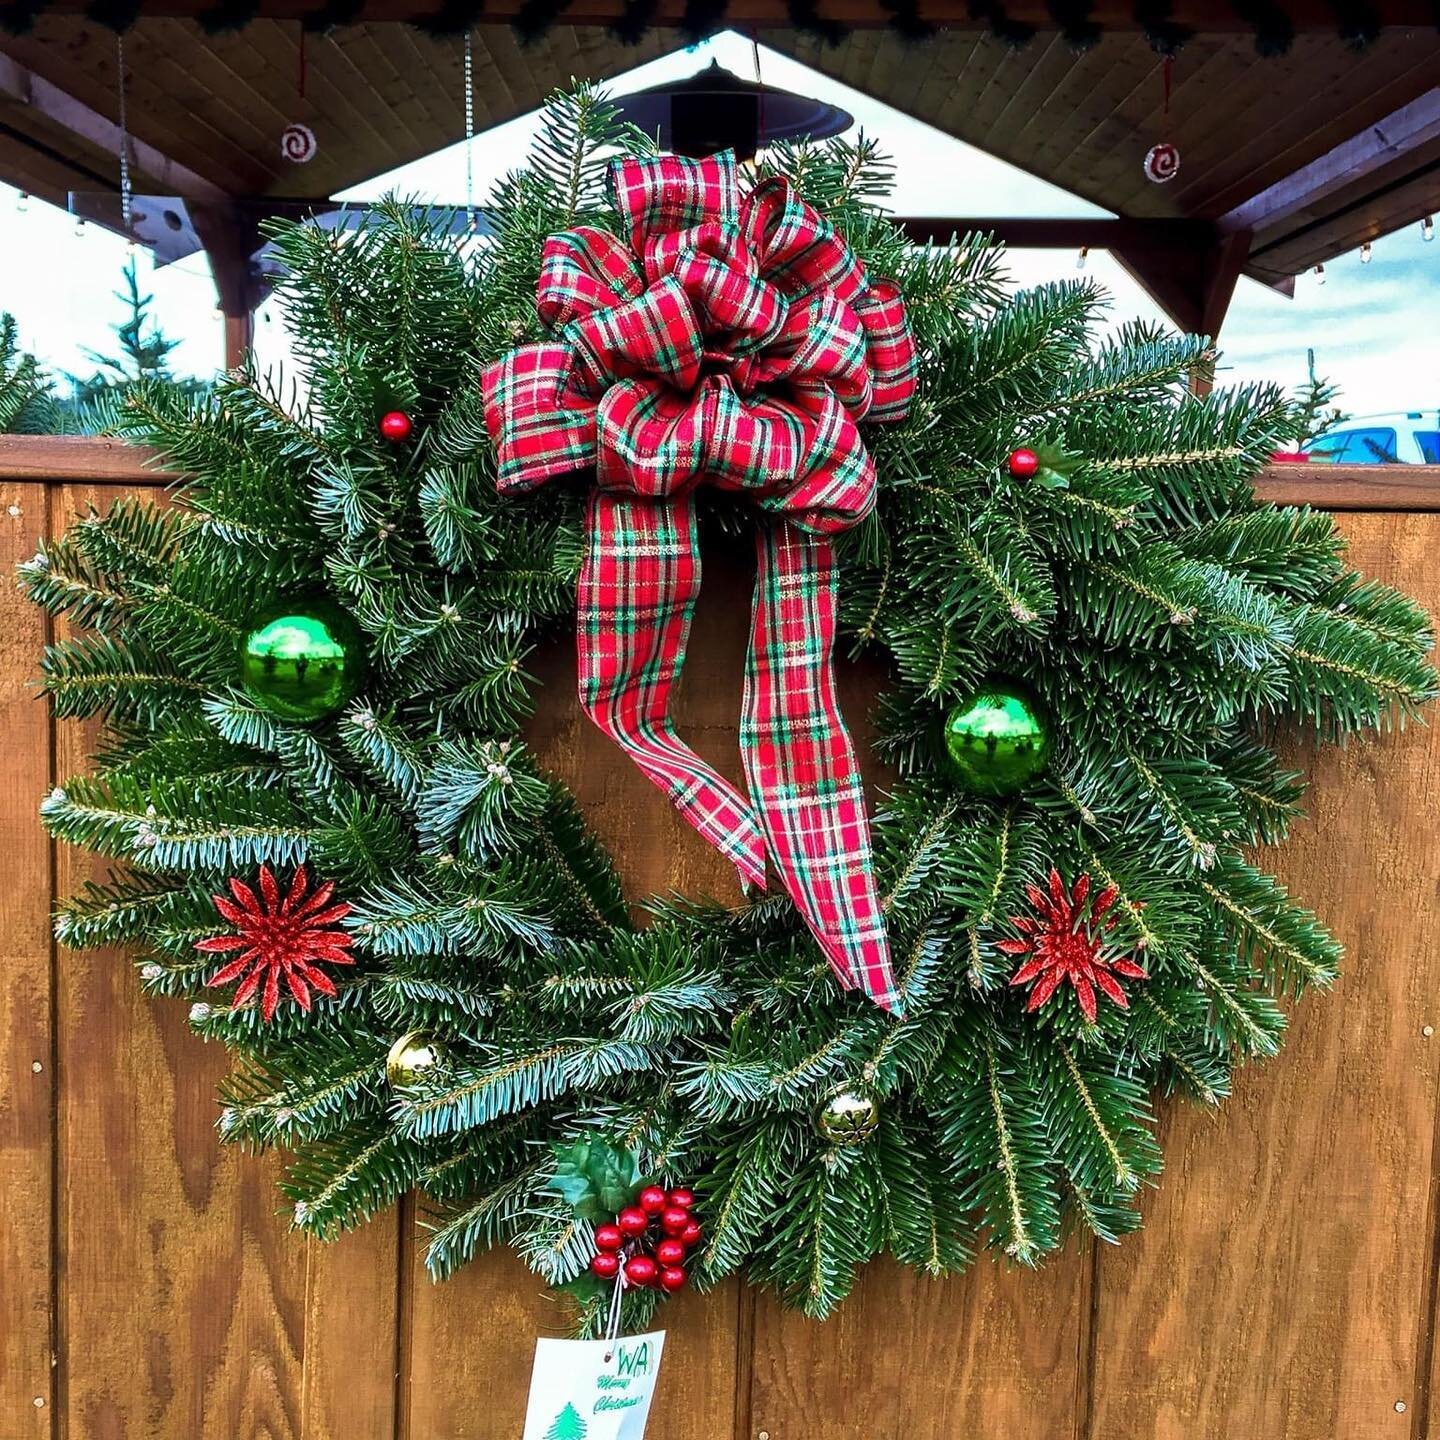 NEW! Organic Wreaths! Buttonwood Farm is excited to announce the addition of  WSDA-certified organic wreaths! We make them by hand, fresh and on-site, with our farm-grown organic Christmas tree greens. You're already getting the freshest, most enviro